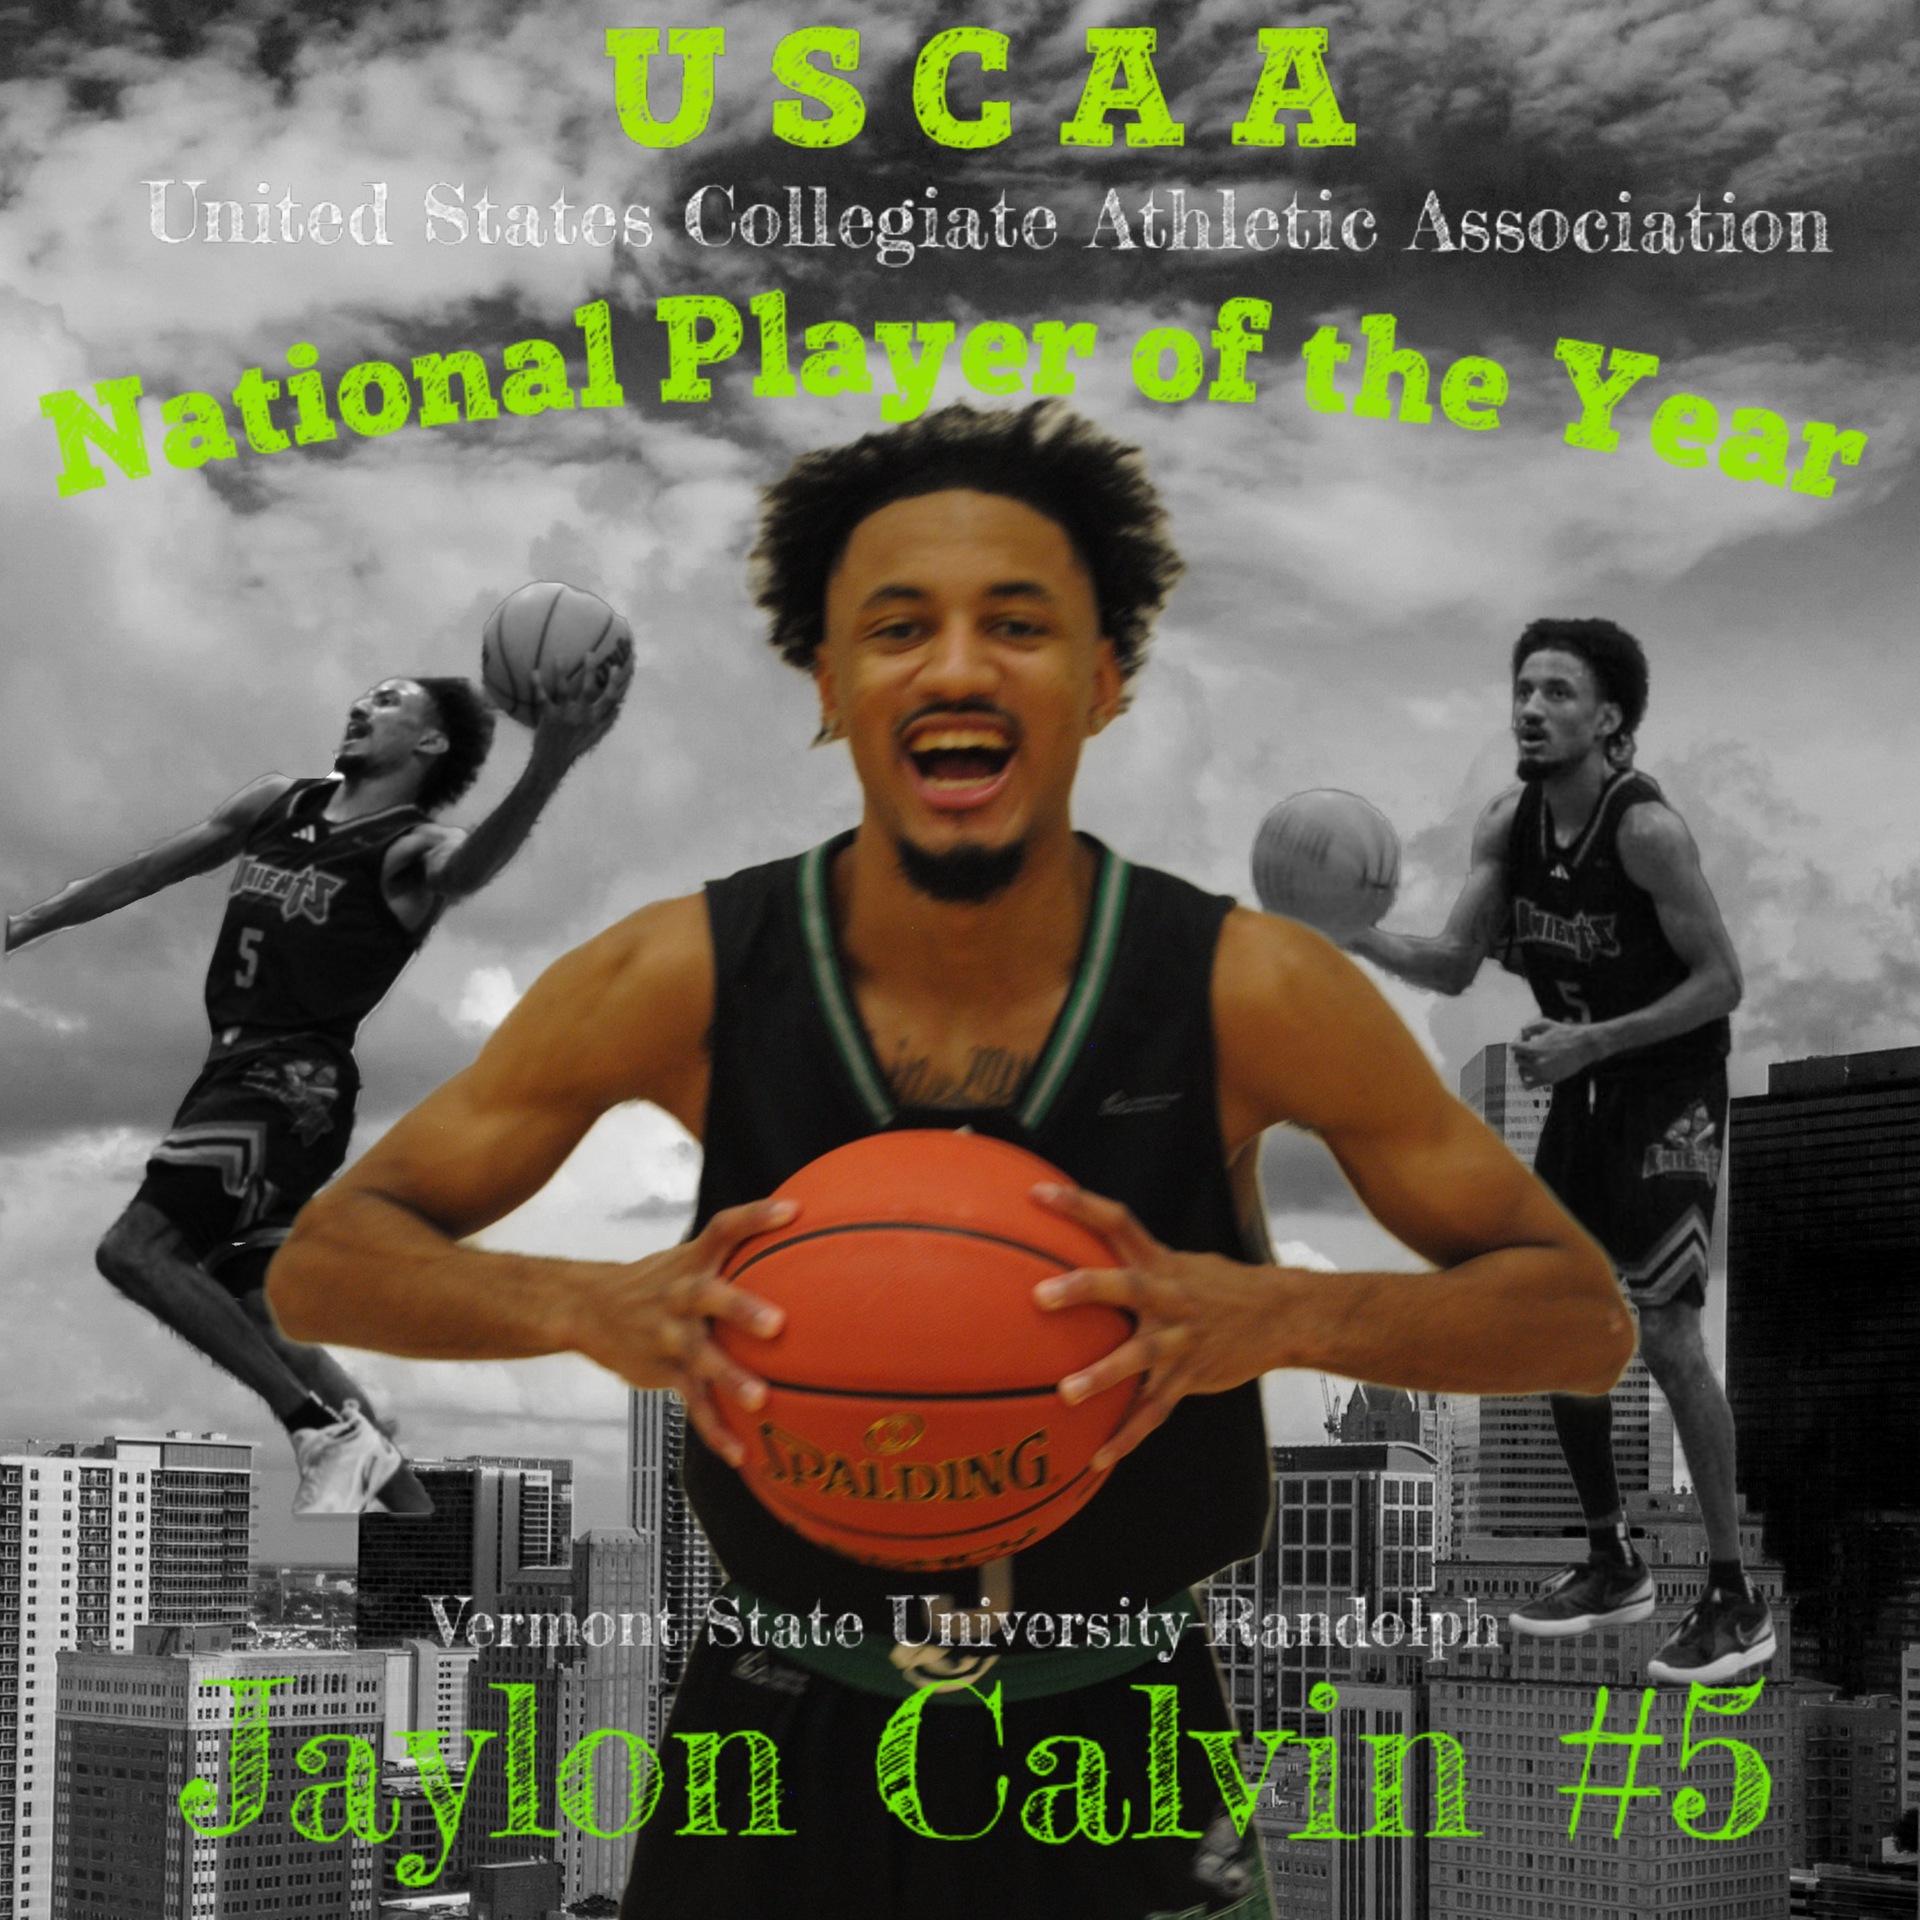 JAYLON CALVIN WINS NATIONAL PLAYER OF THE YEAR